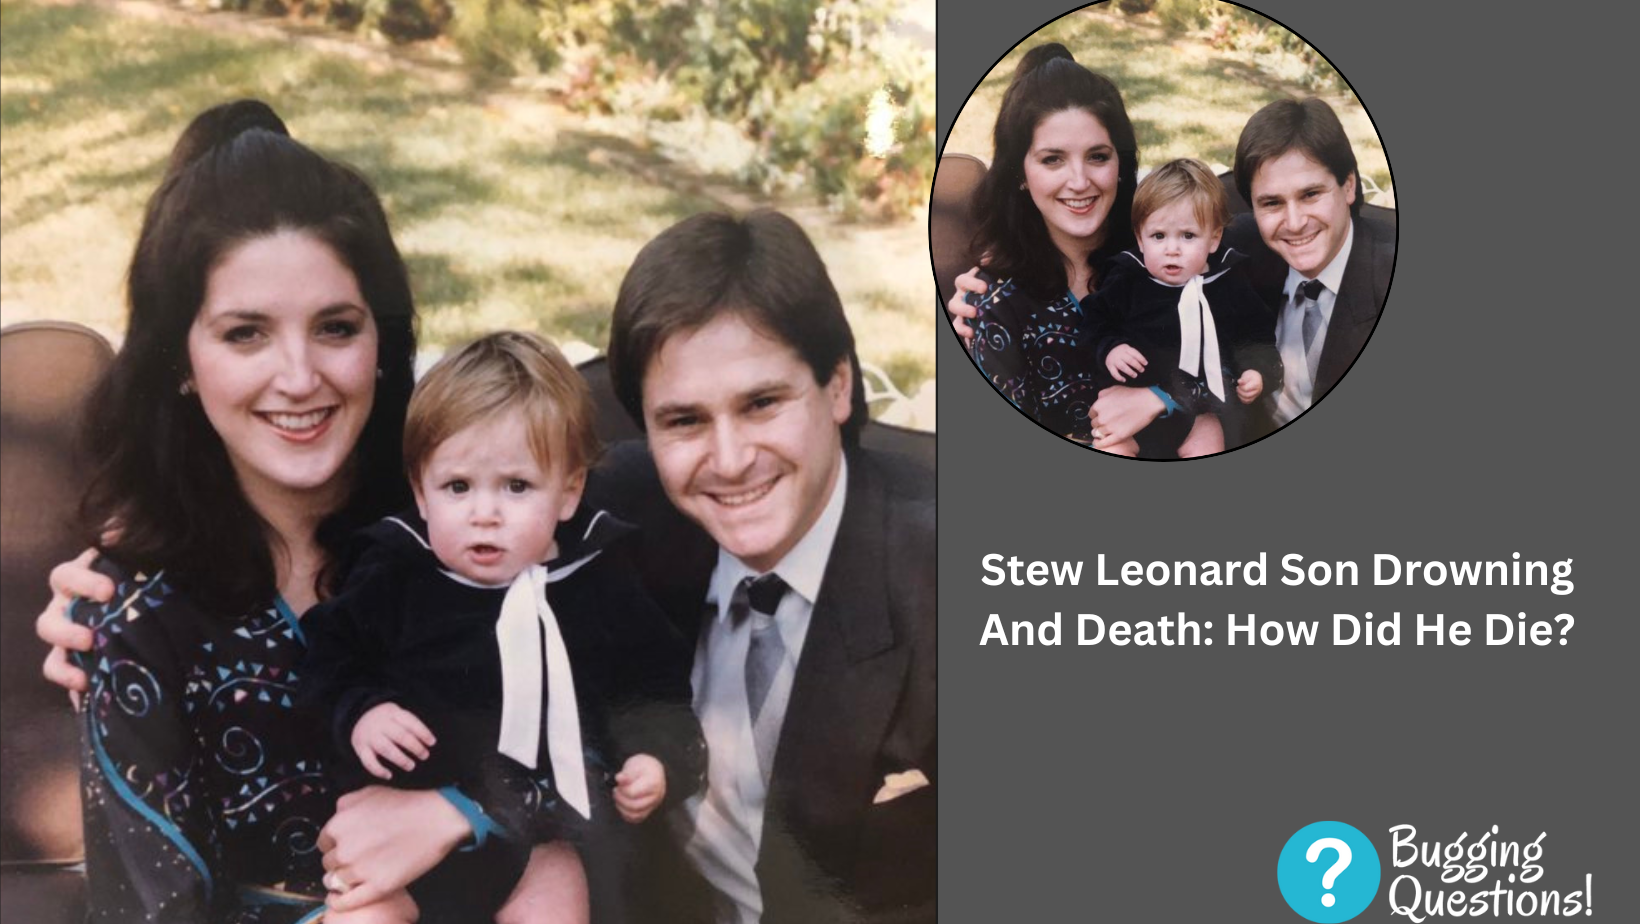 Stew Leonard Son Drowning And Death: How Did He Die?